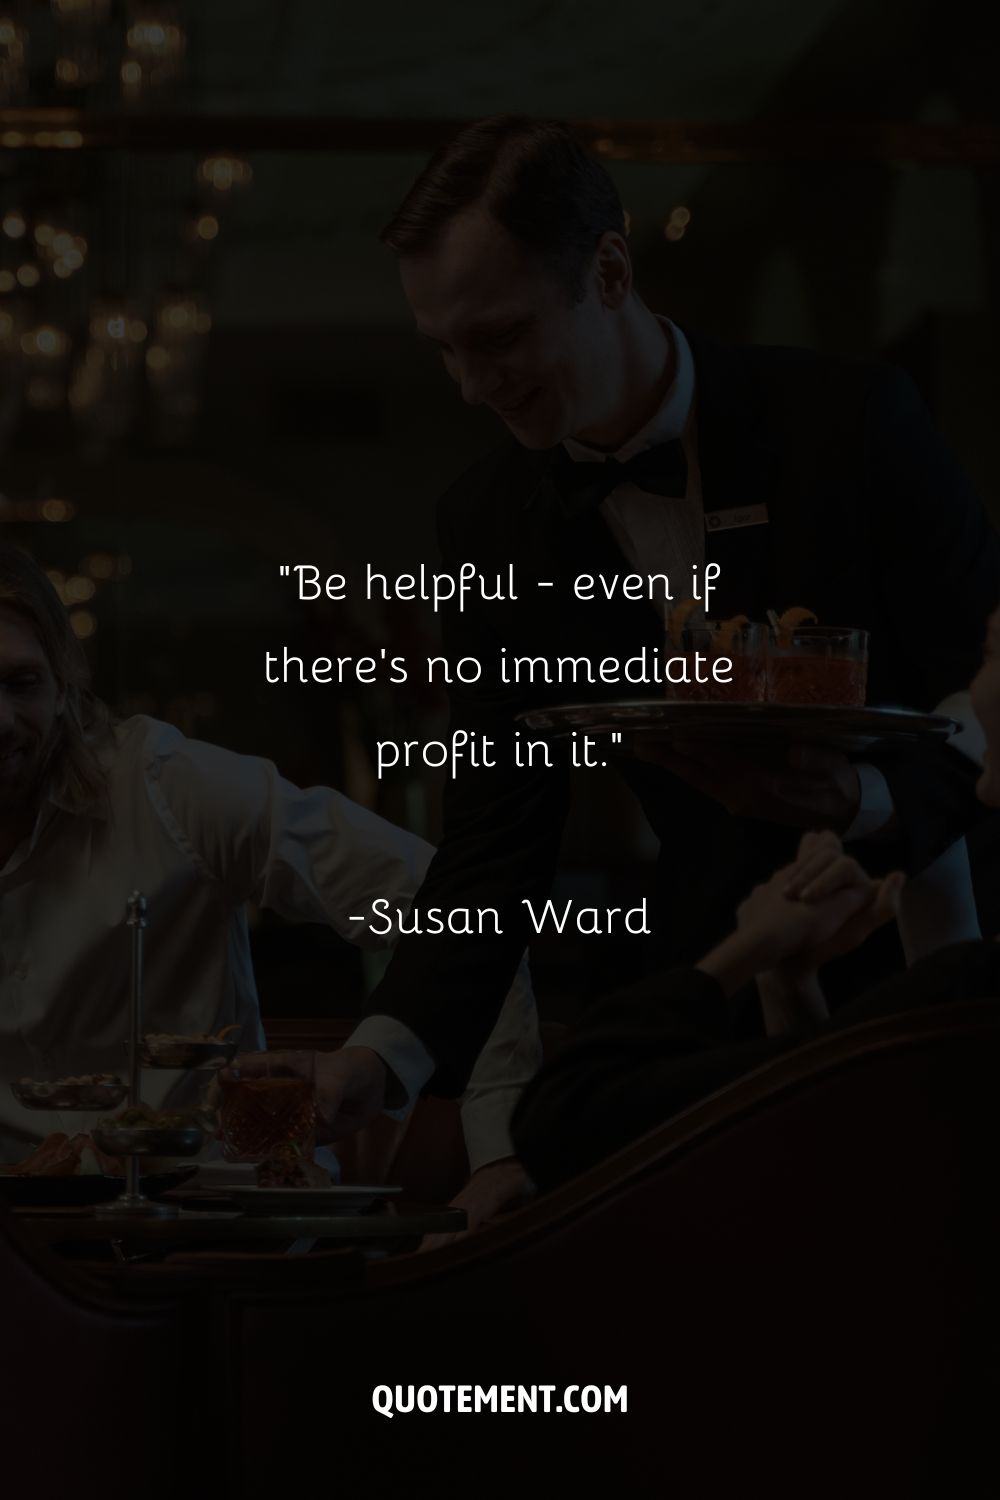 Image of a waiter offering drinks representing a quote on being helpful.